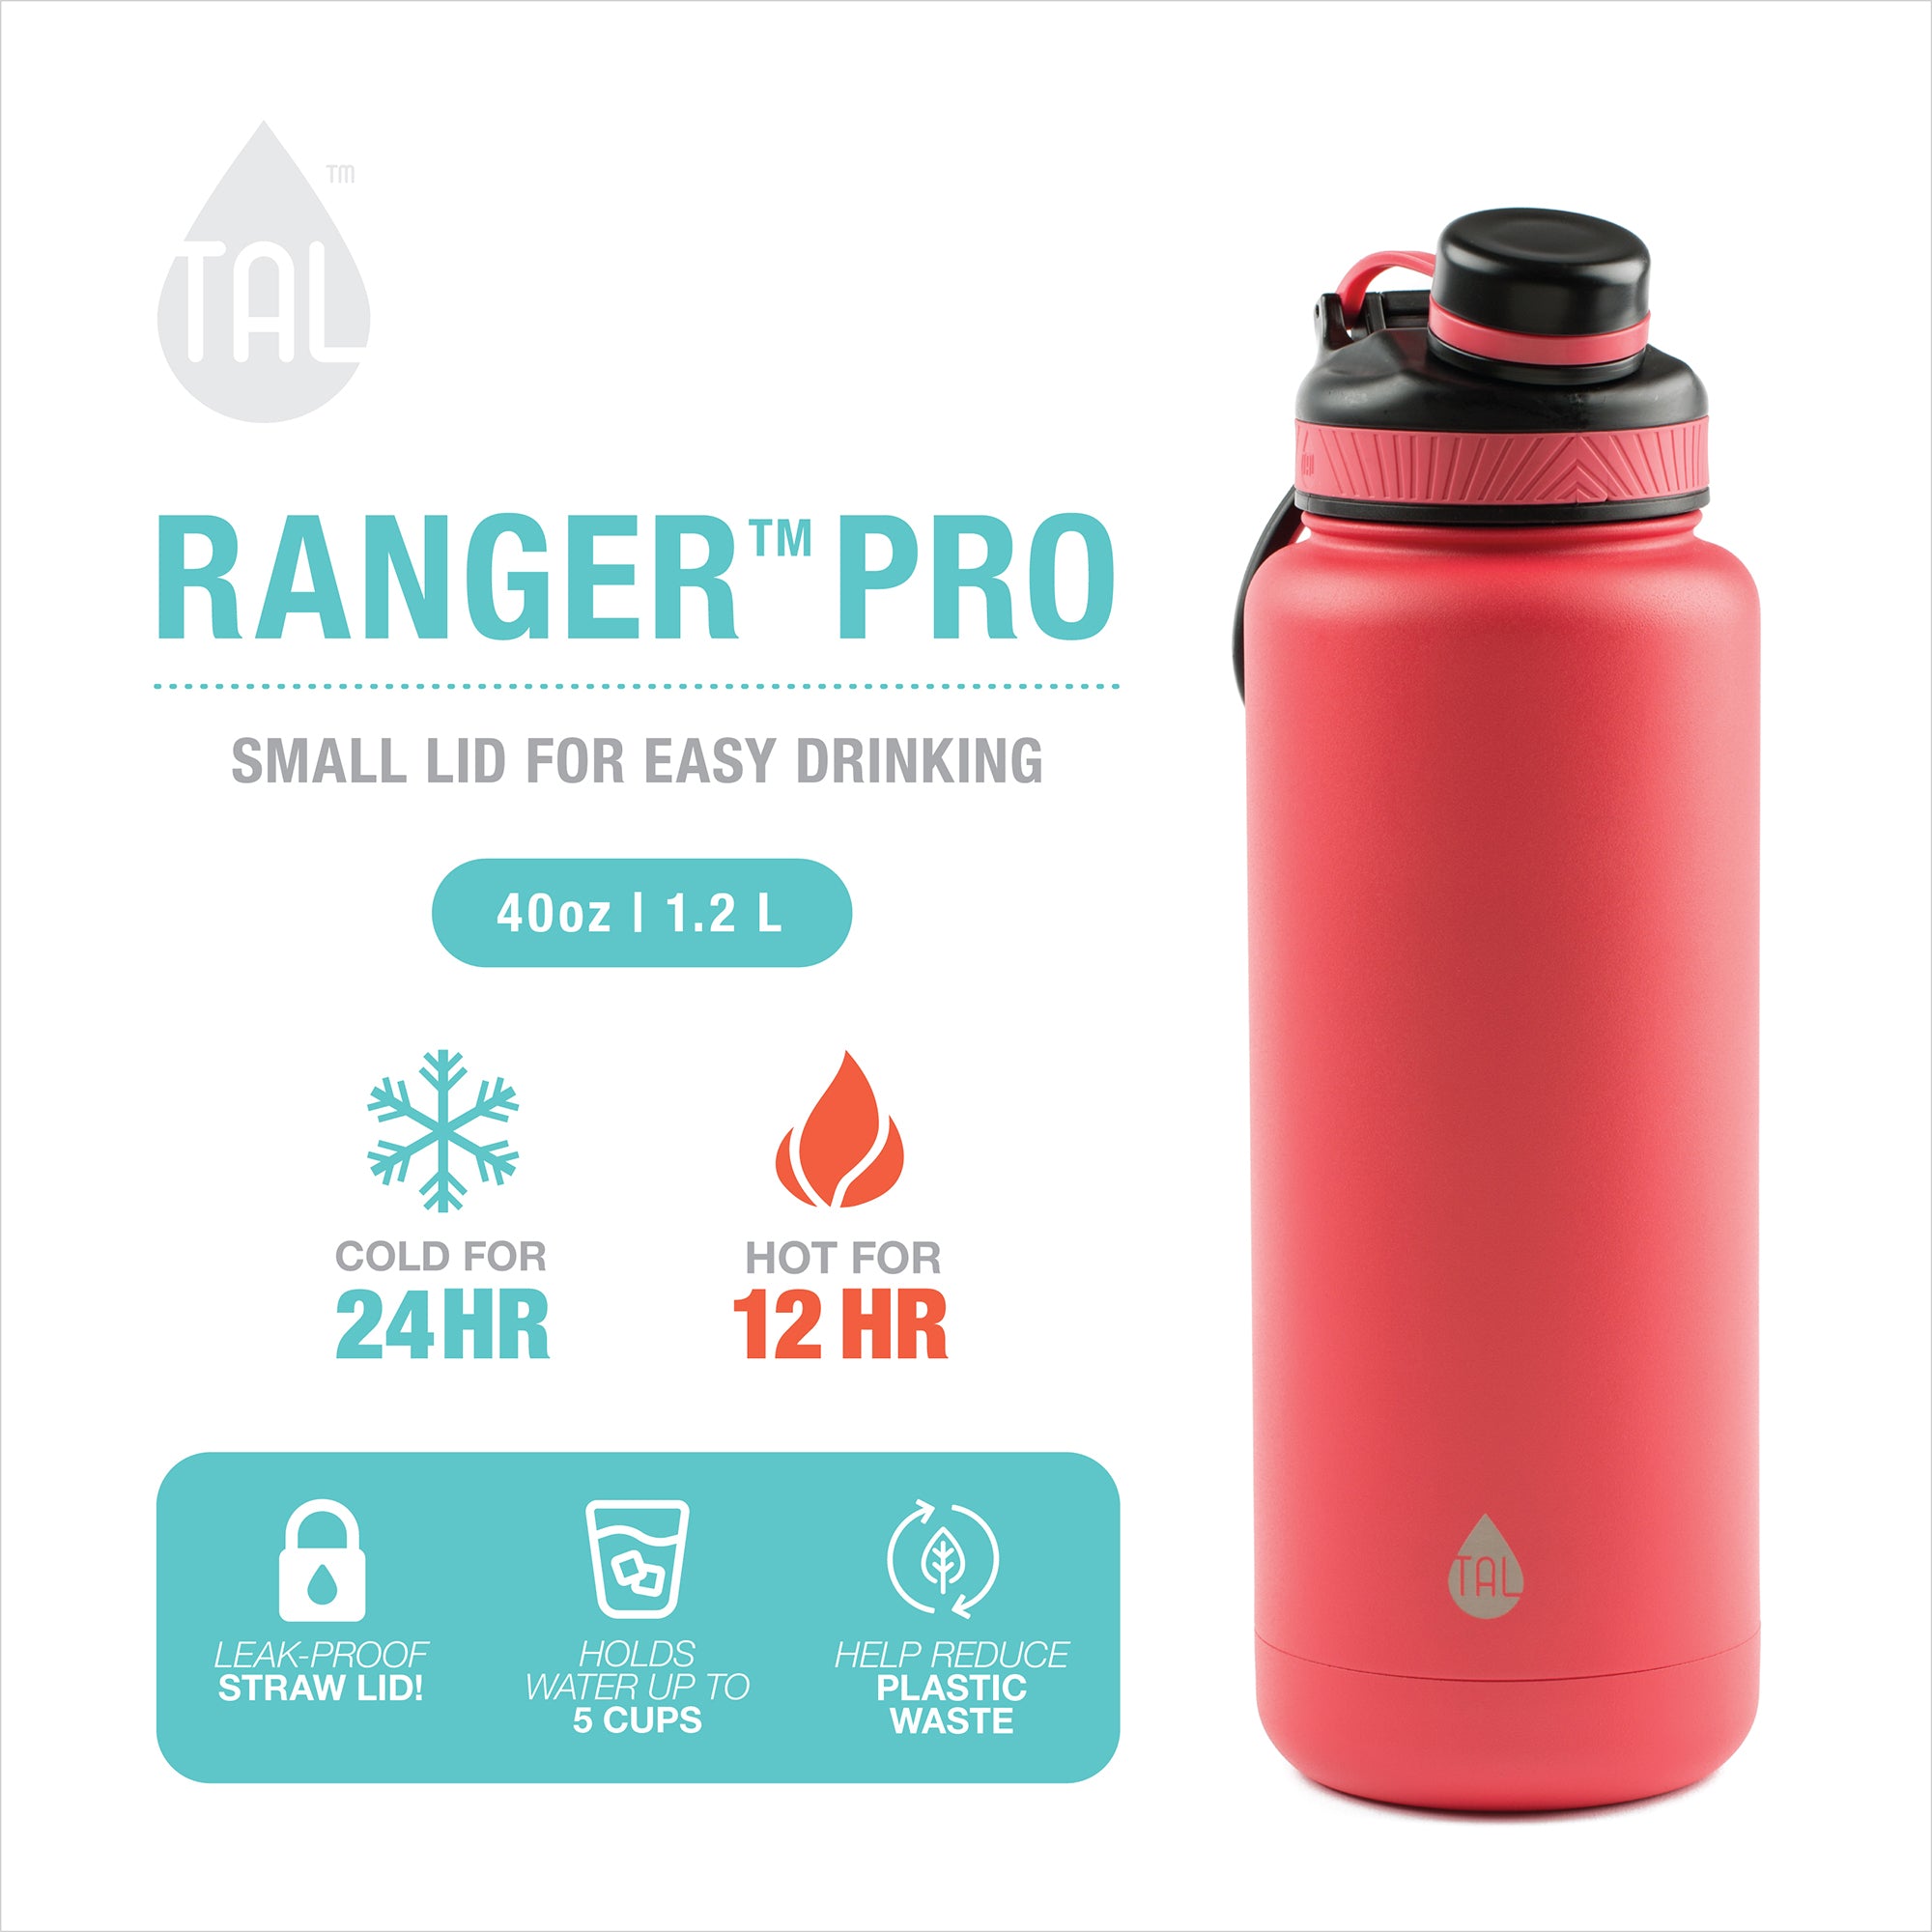  TAL Water Bottle Double Wall Insulated Stainless Steel Ranger  Pro - 40 oz - MINT (MINT) : Sports & Outdoors